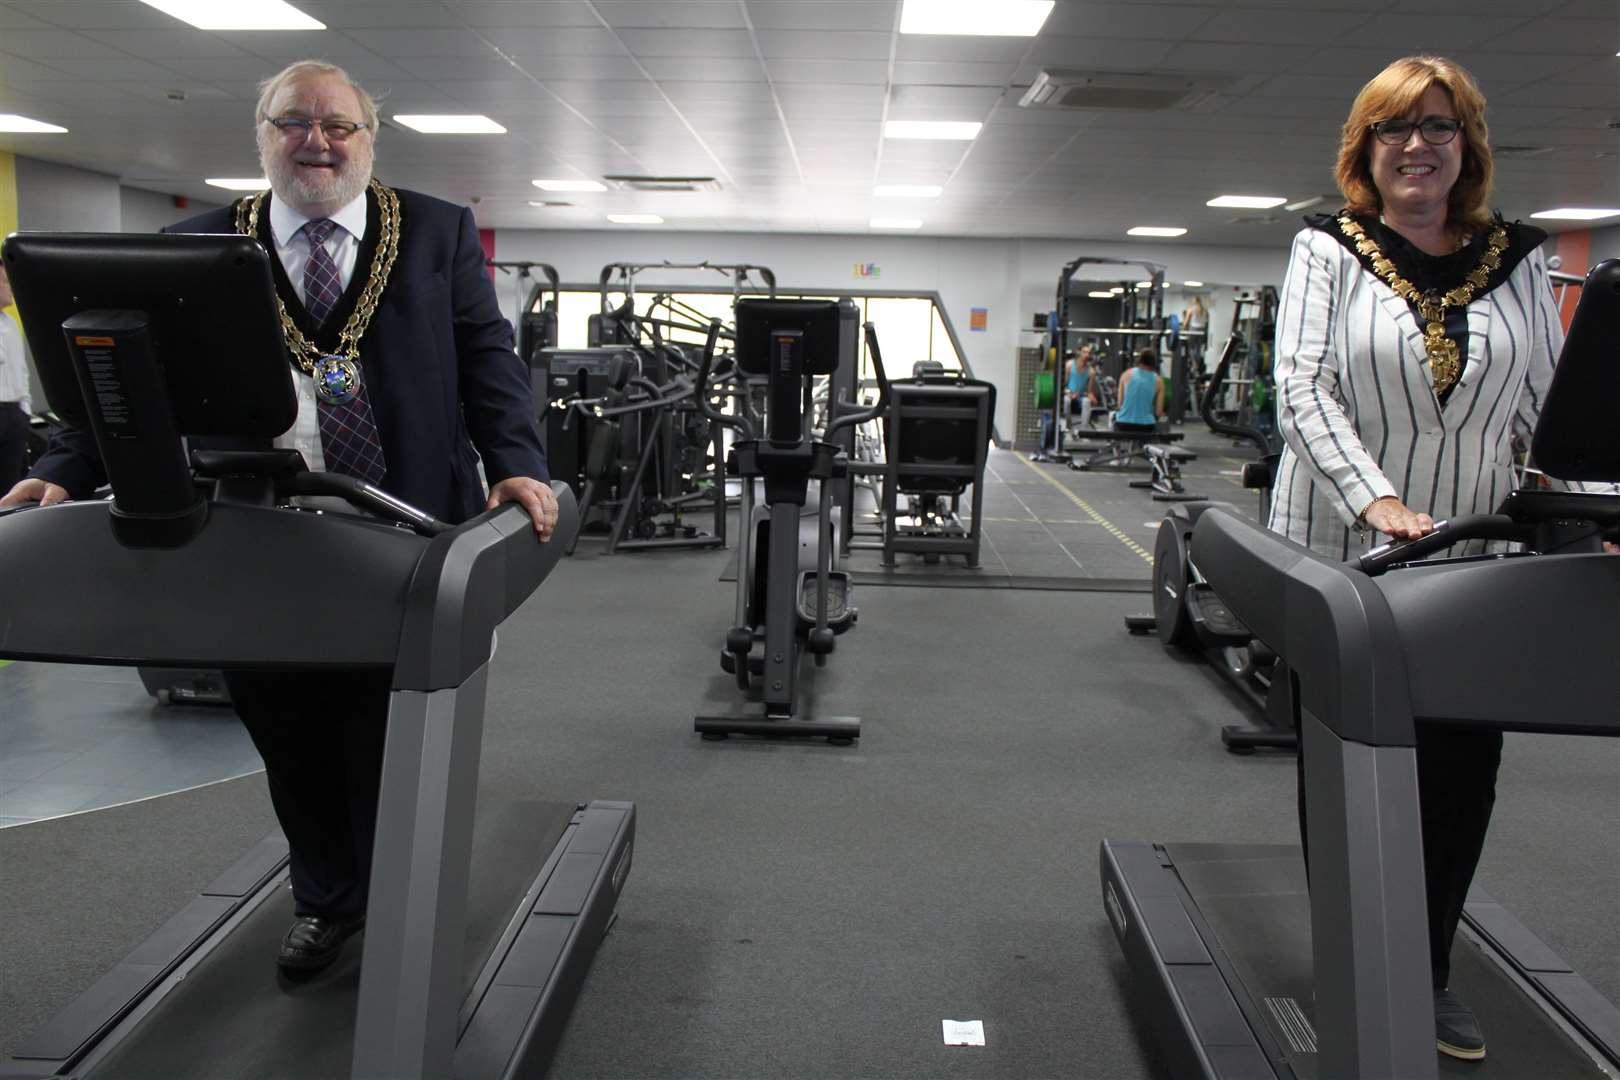 Uttlesford District Council chairman Cllr Martin Foley and Saffron Walden mayor Heather Asker get to work on the treadmills (39850304)